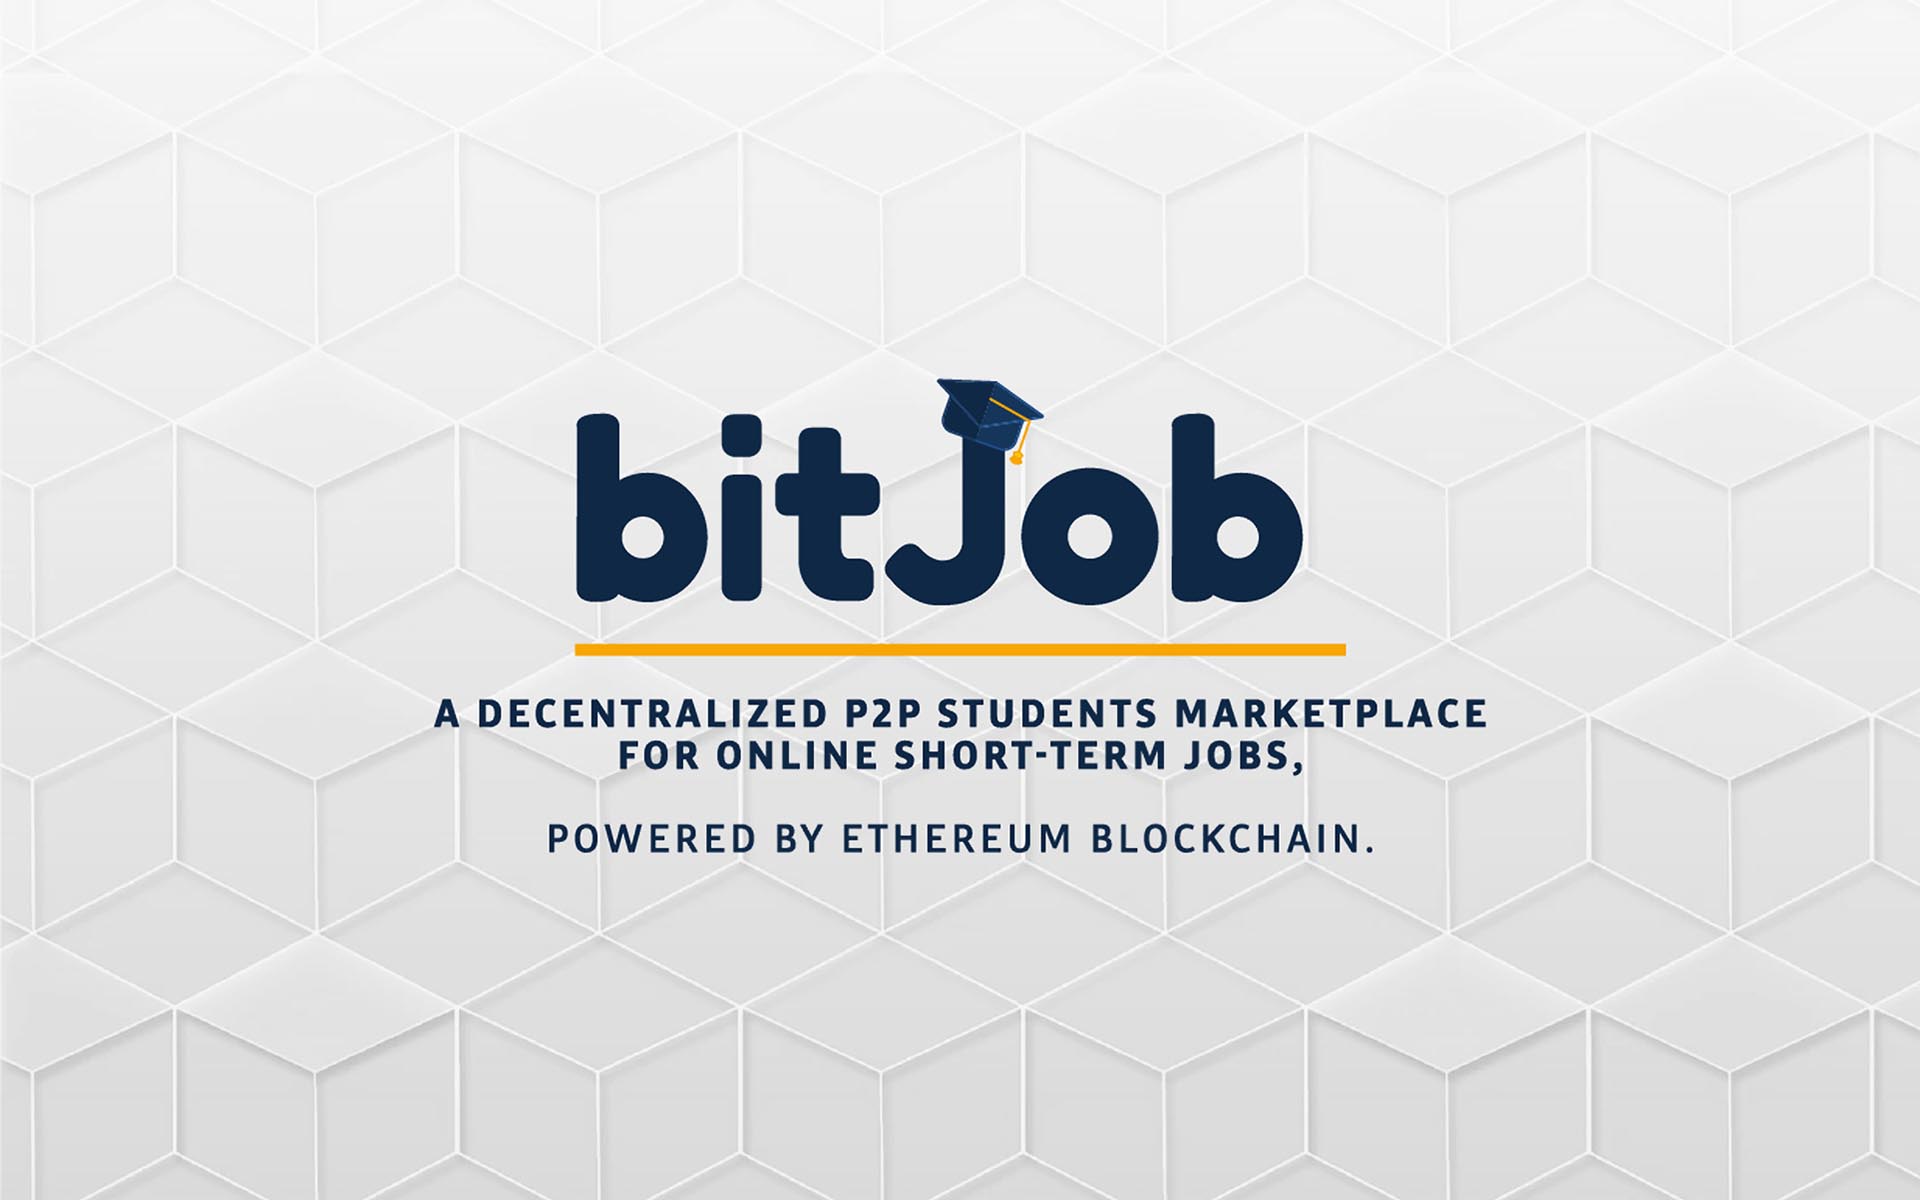 Student Job Market Startup bitJob Connects with UK ATM Company